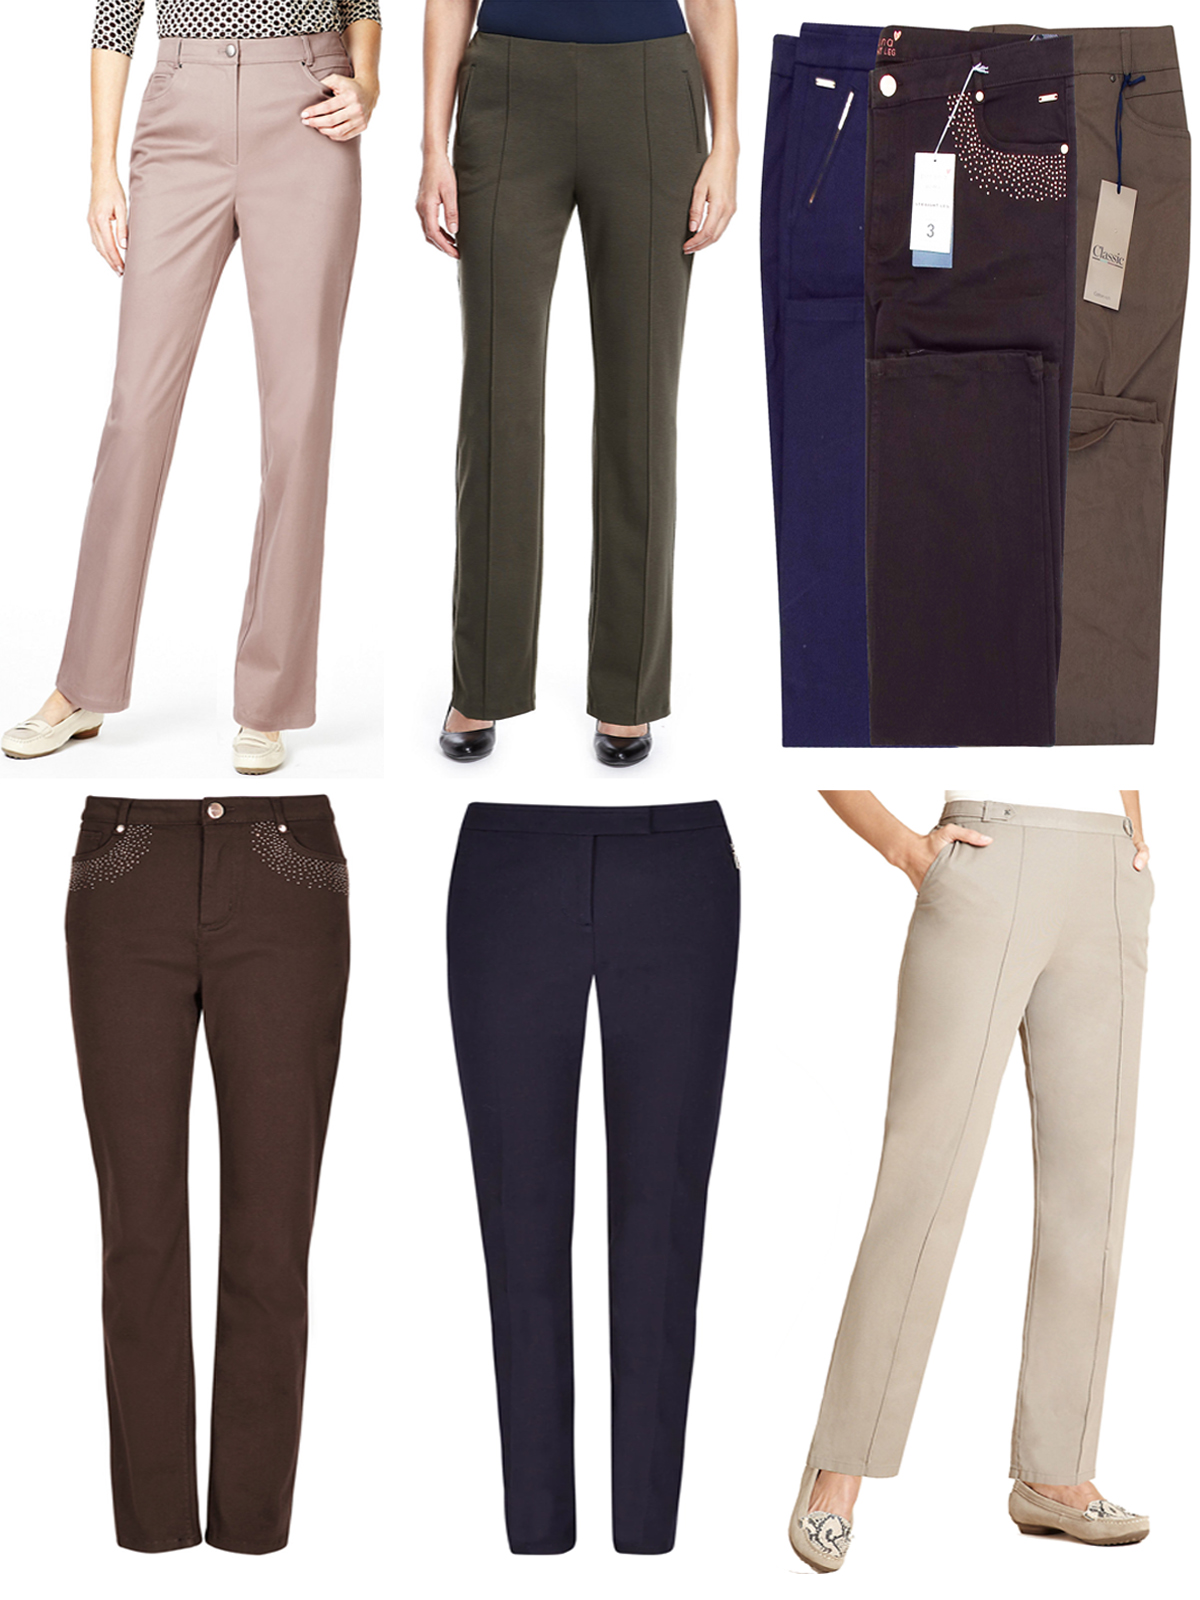 Marks and Spencer - - M&5 ASSORTED Ladies Trousers - Plus Size 16 to 22